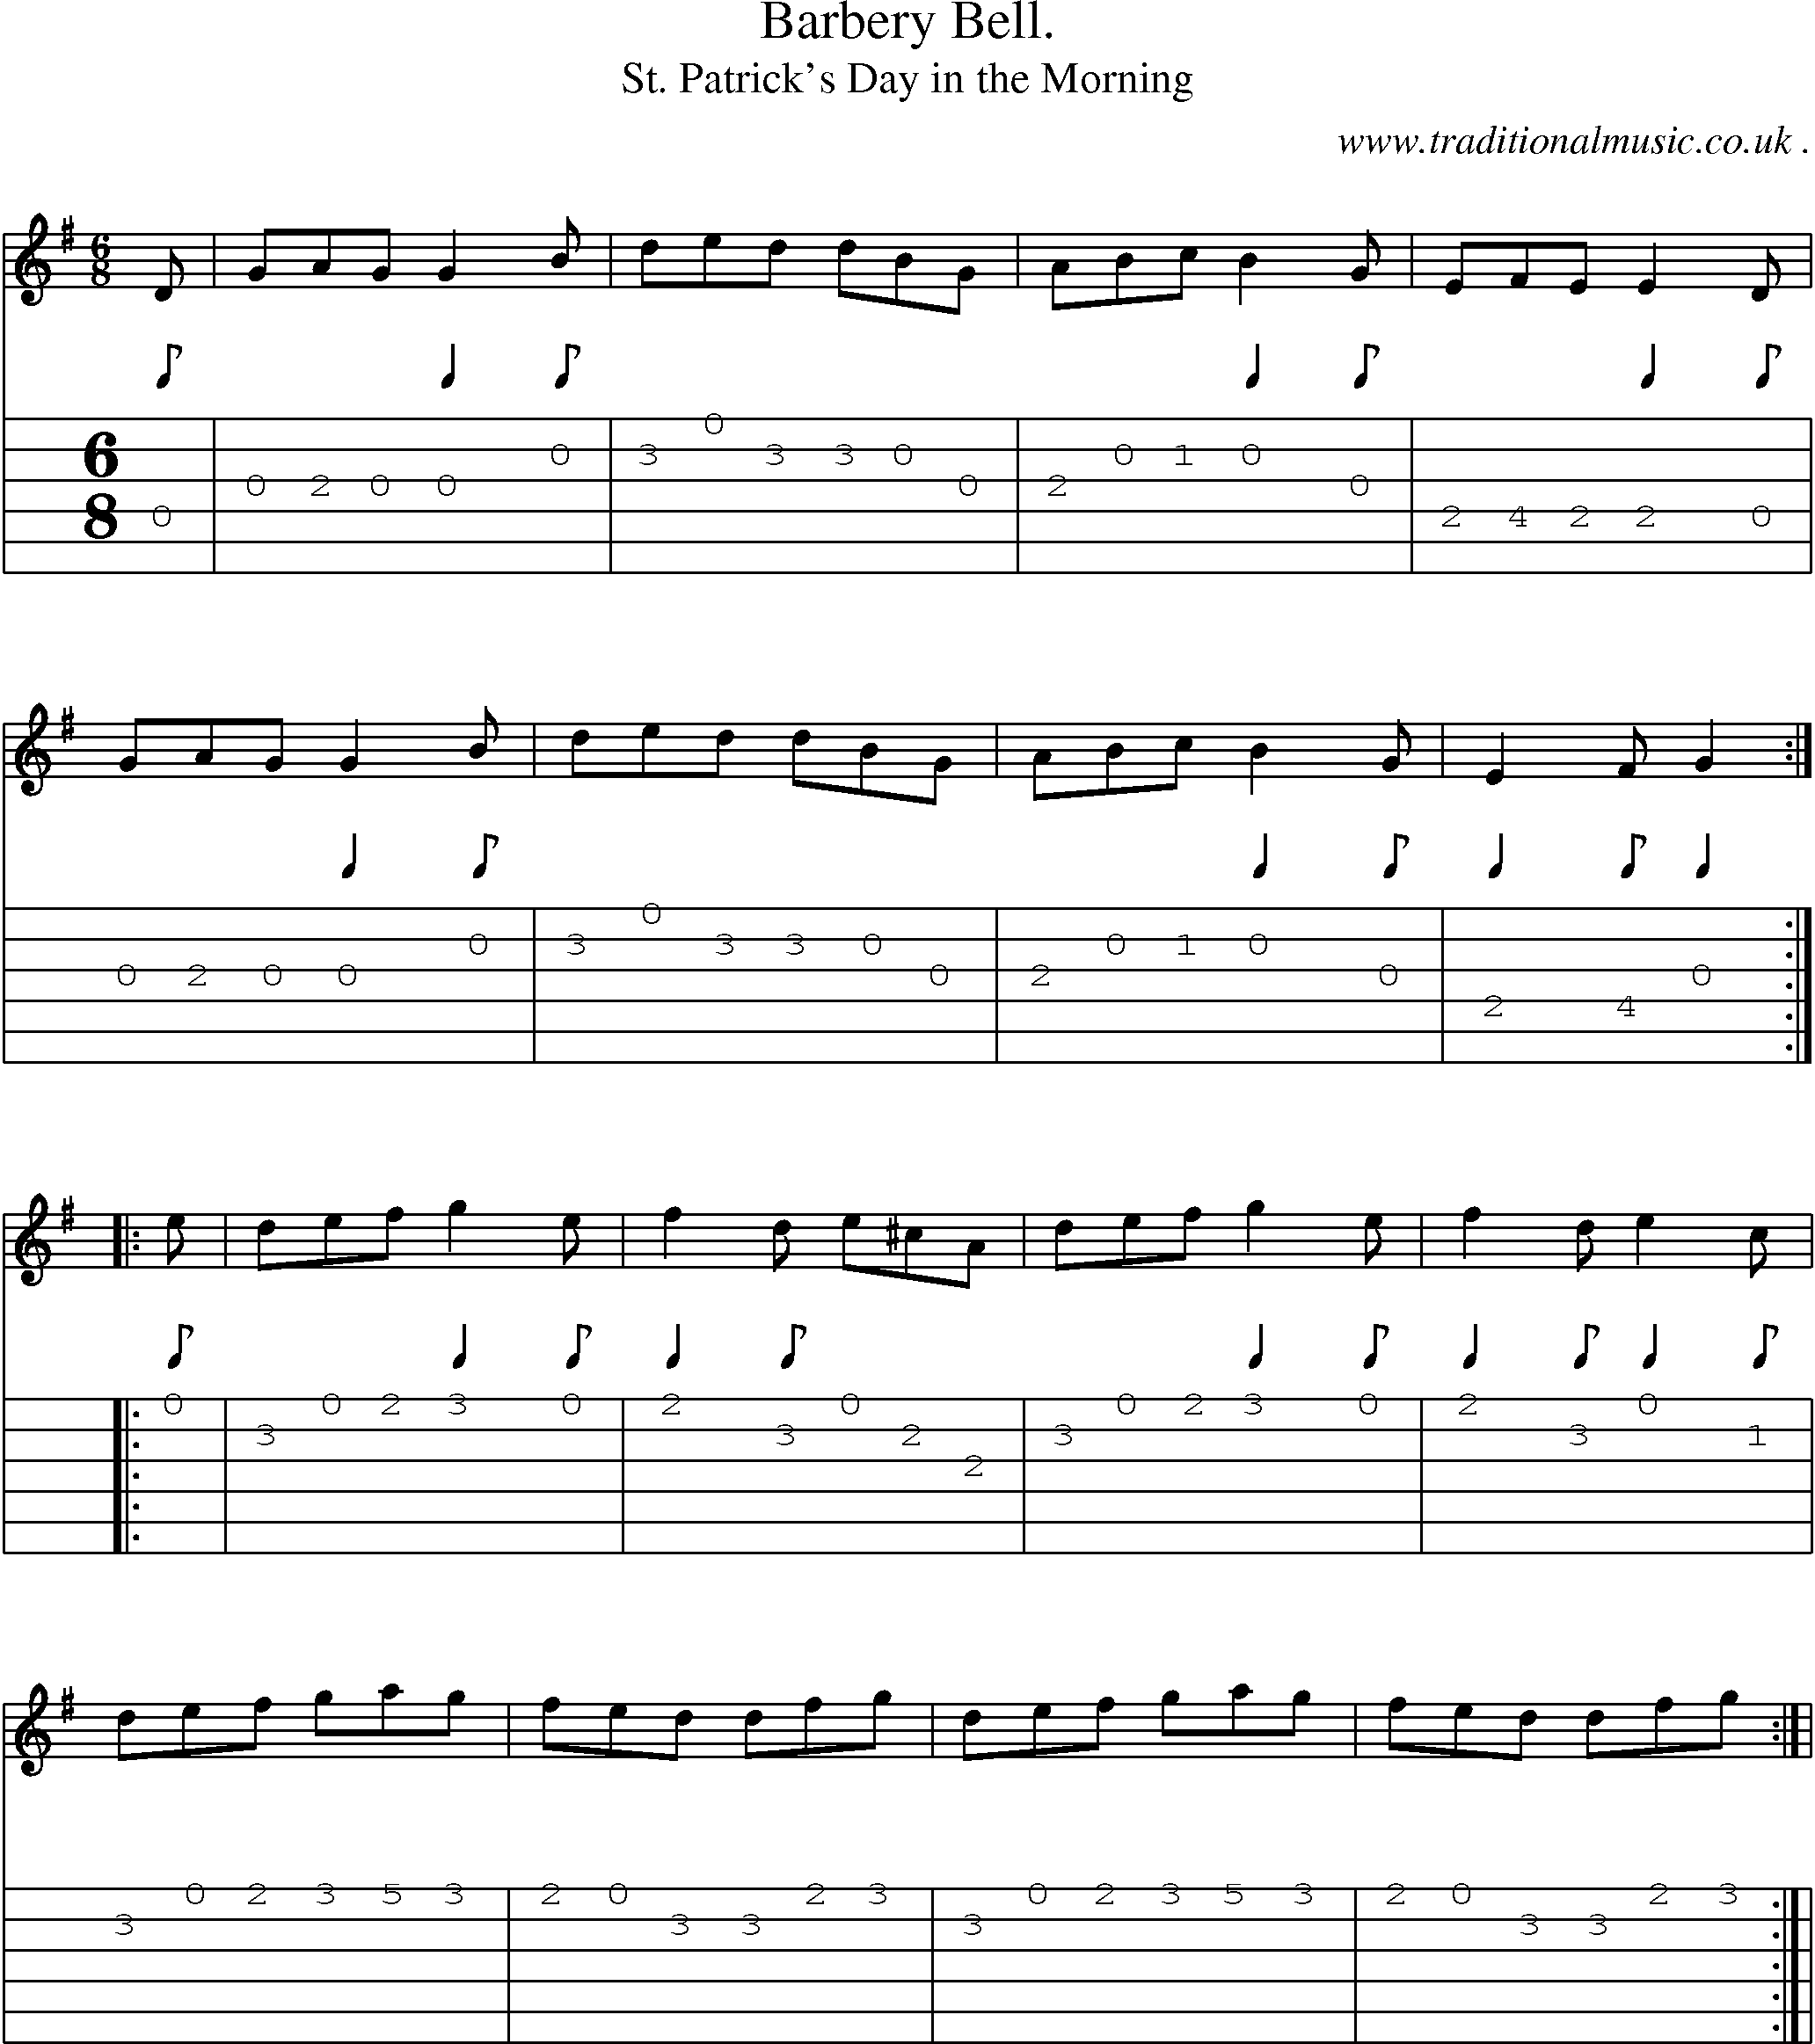 Sheet-Music and Guitar Tabs for Barbery Bell